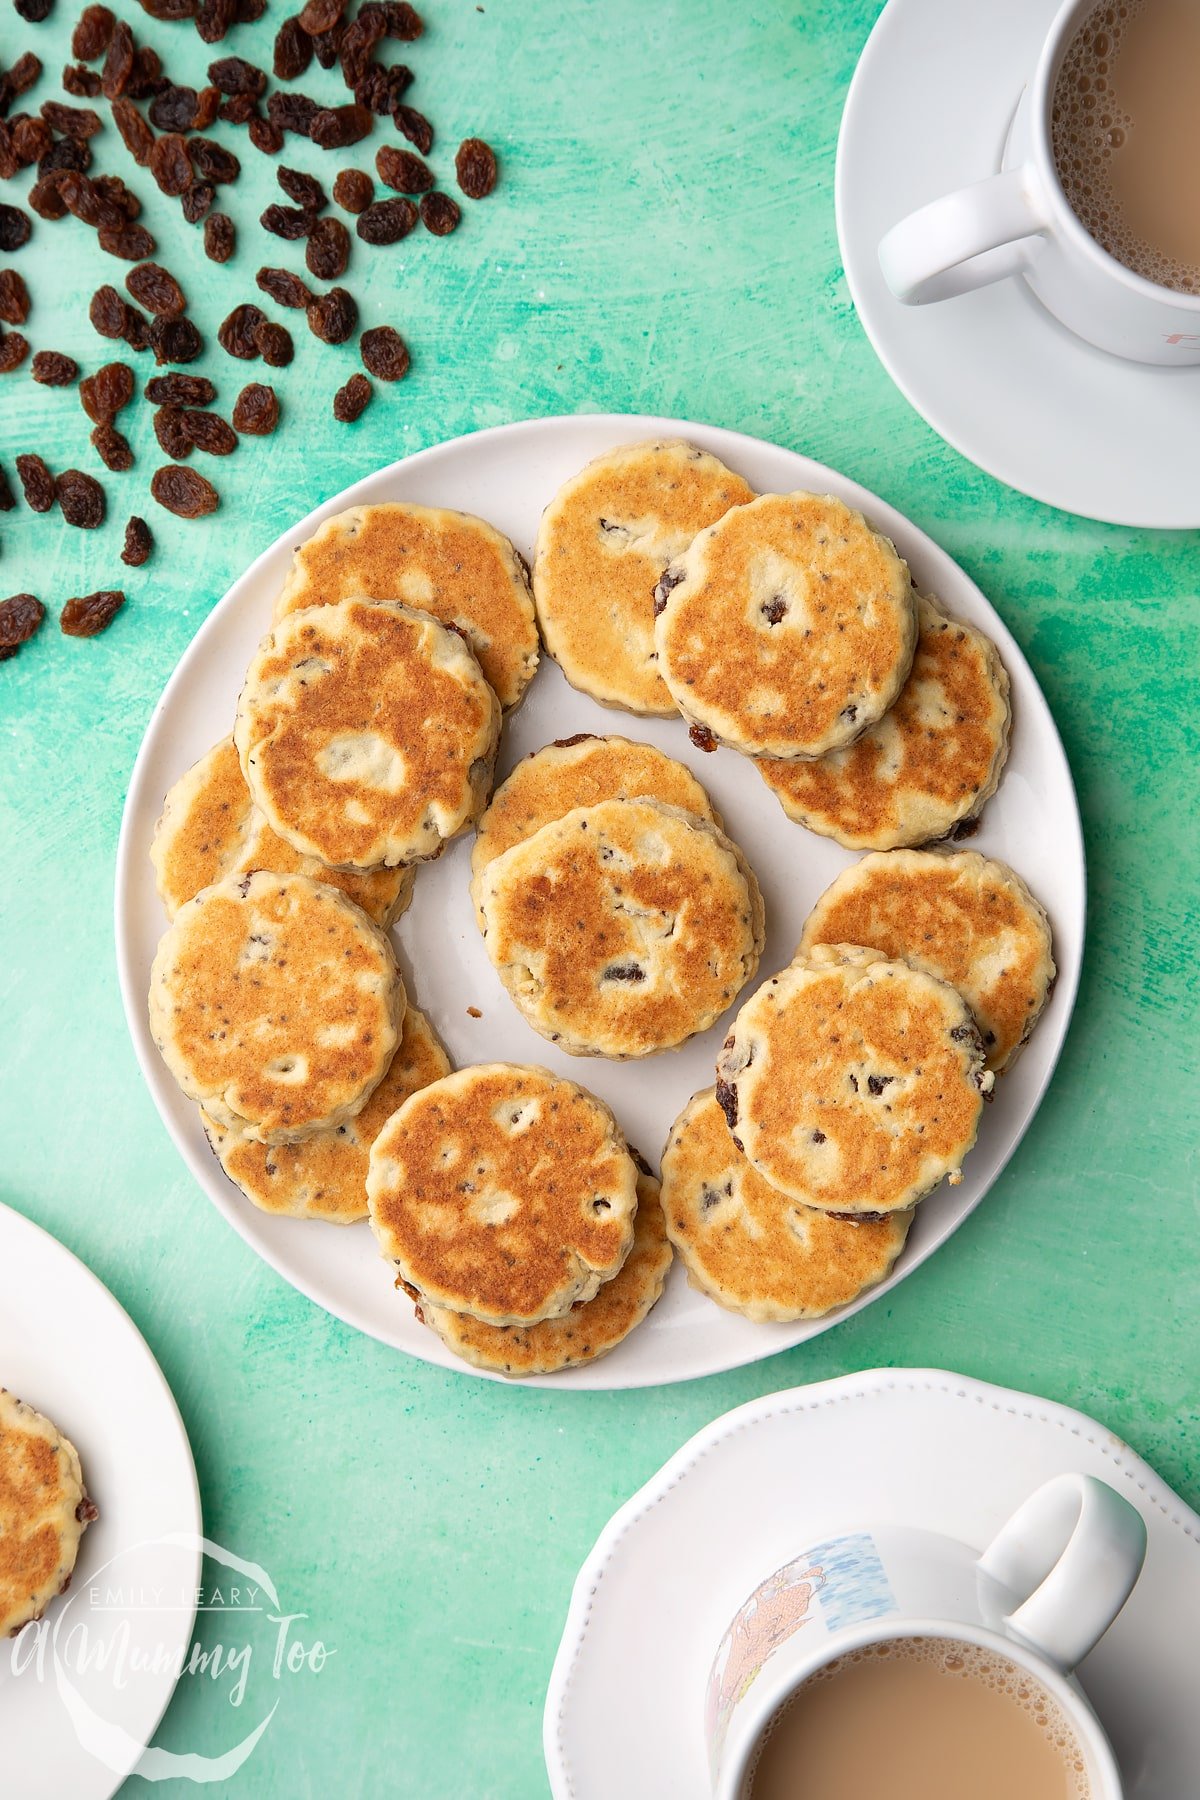 Vegan Welsh cakes arranged on a white plate. Surrounding the plate are cups of tea.